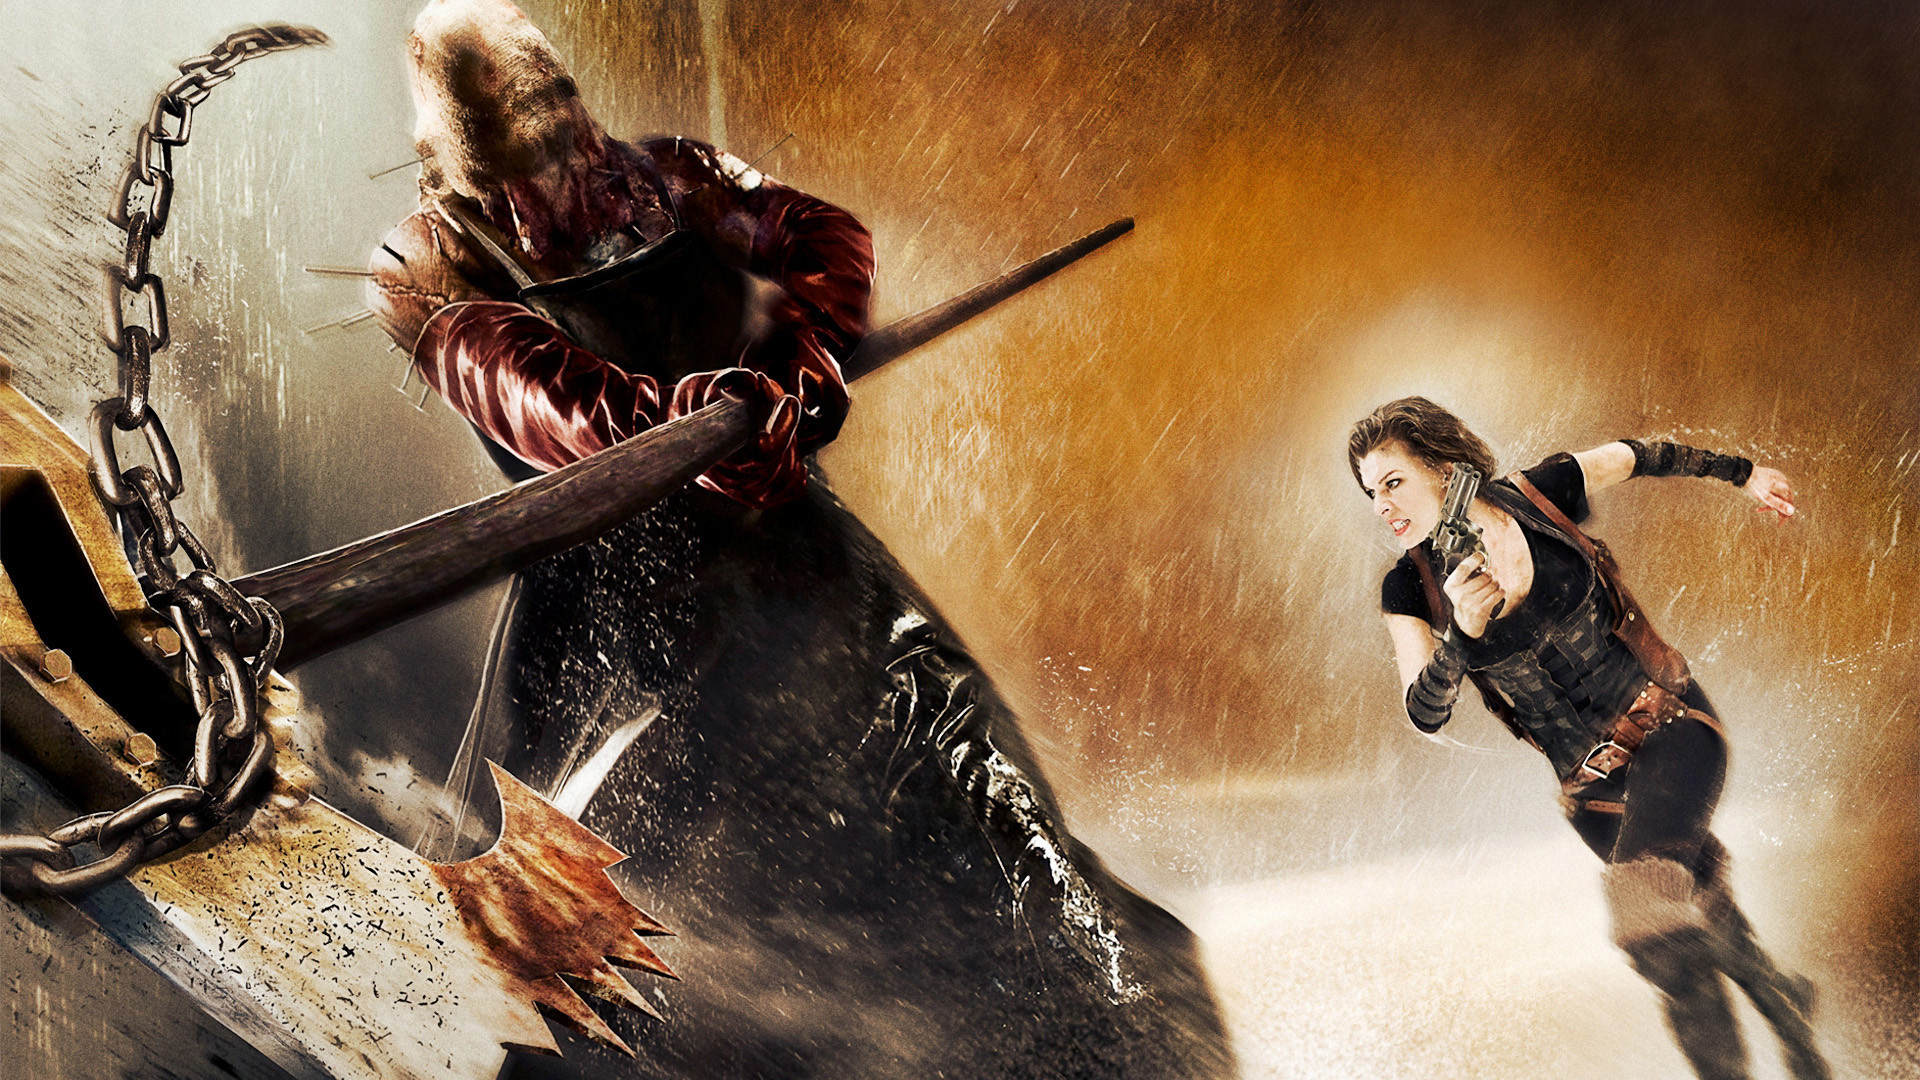 Resident Evil: Afterlife Backgrounds, Compatible - PC, Mobile, Gadgets| 1920x1080 px